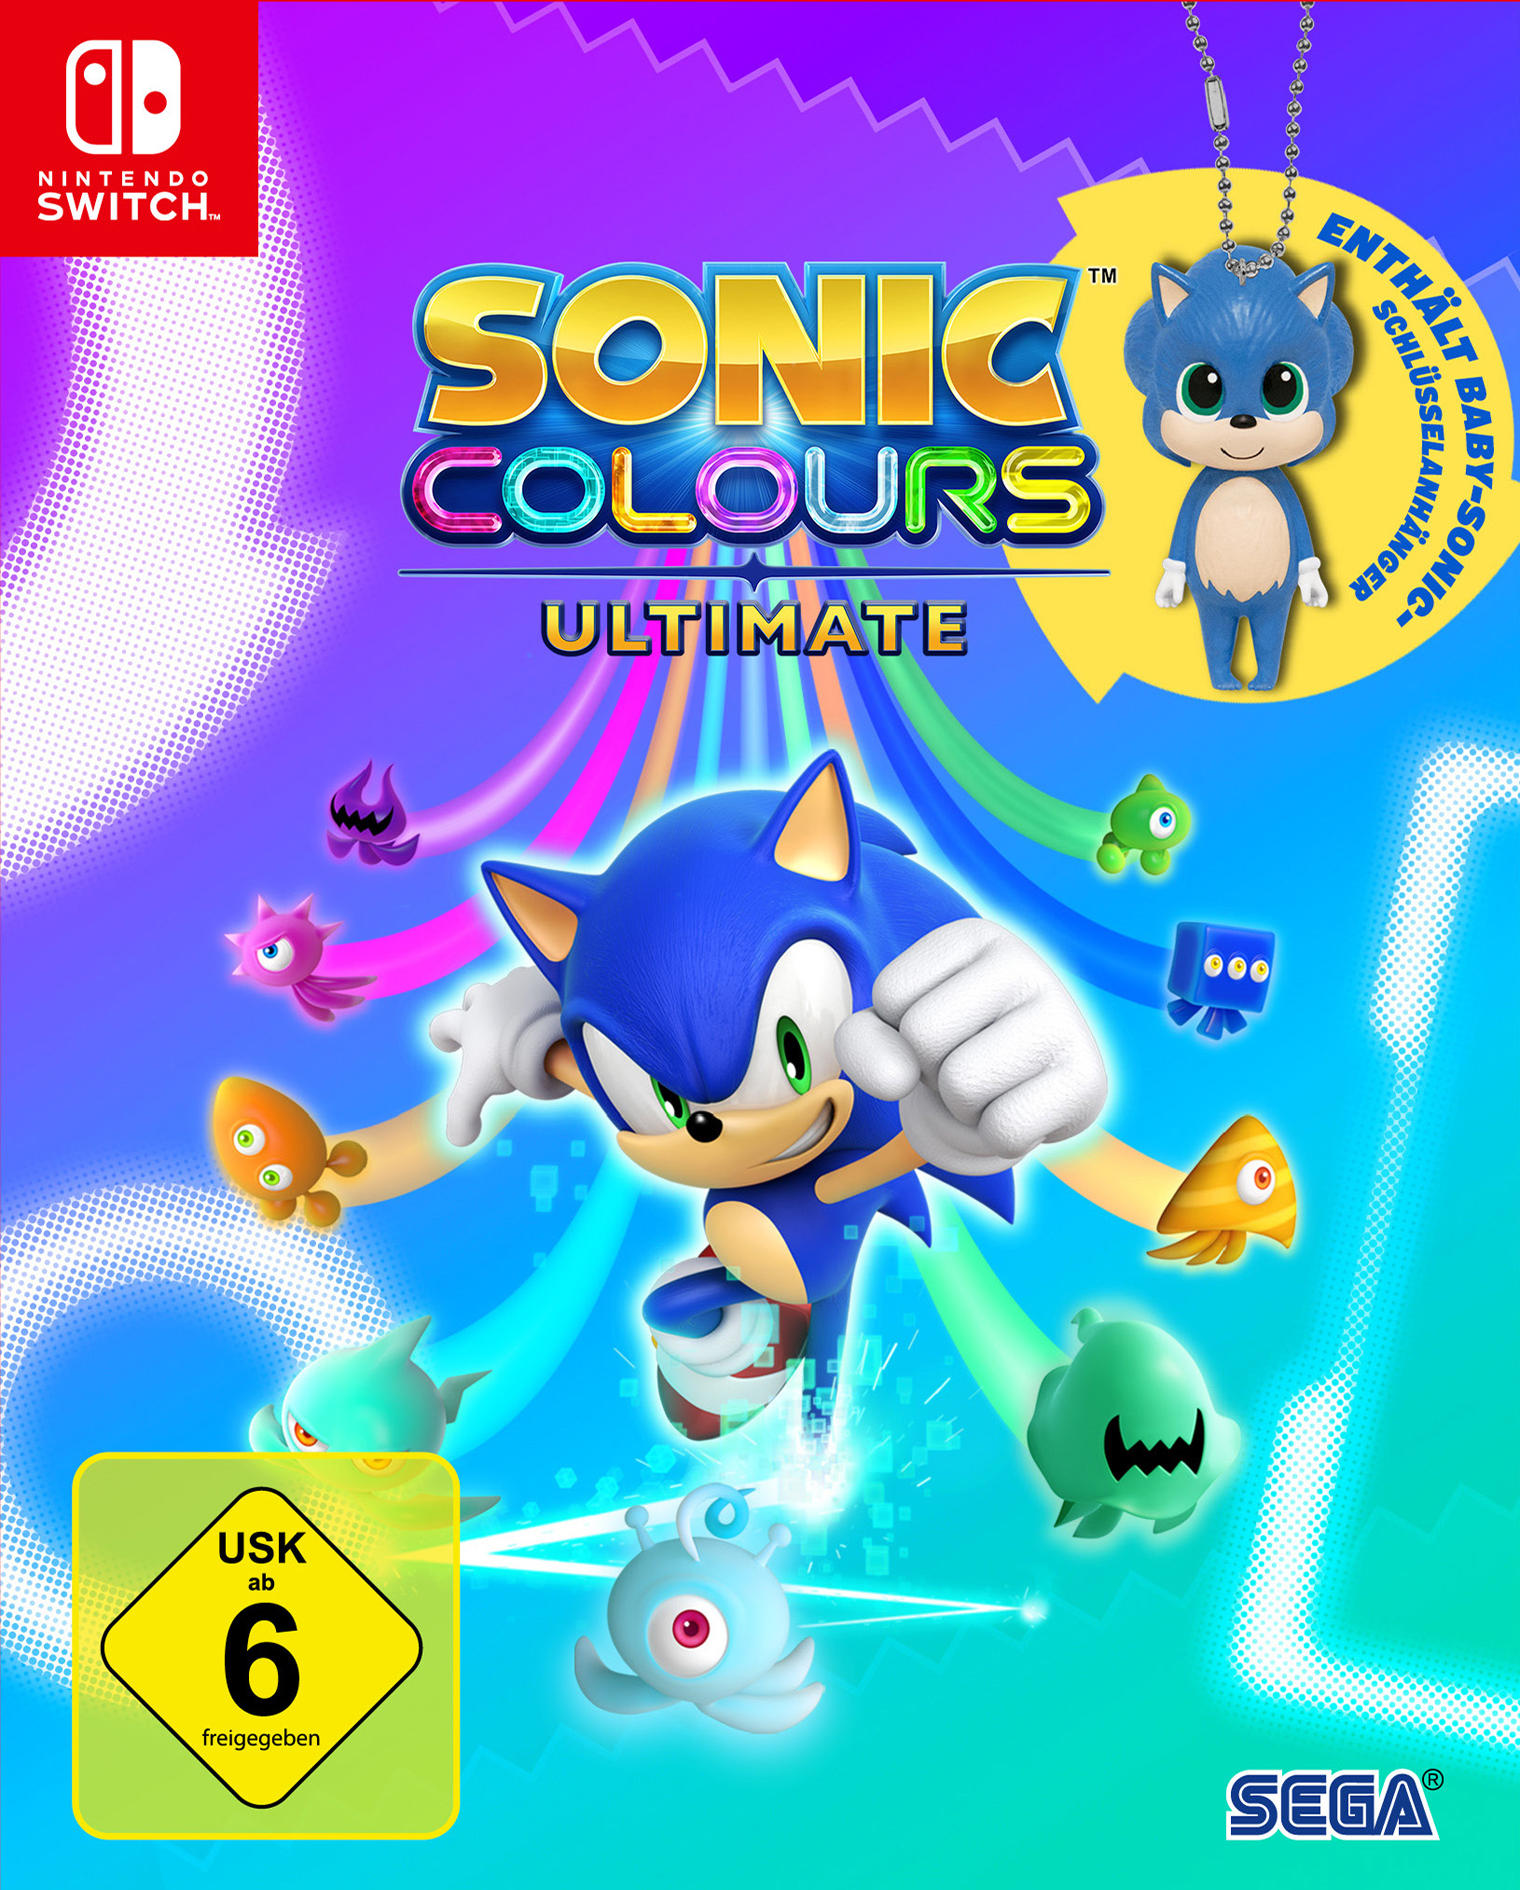 ULTIMATE LAUNCH - COLOURS: SONIC [Nintendo SW EDITION Switch]